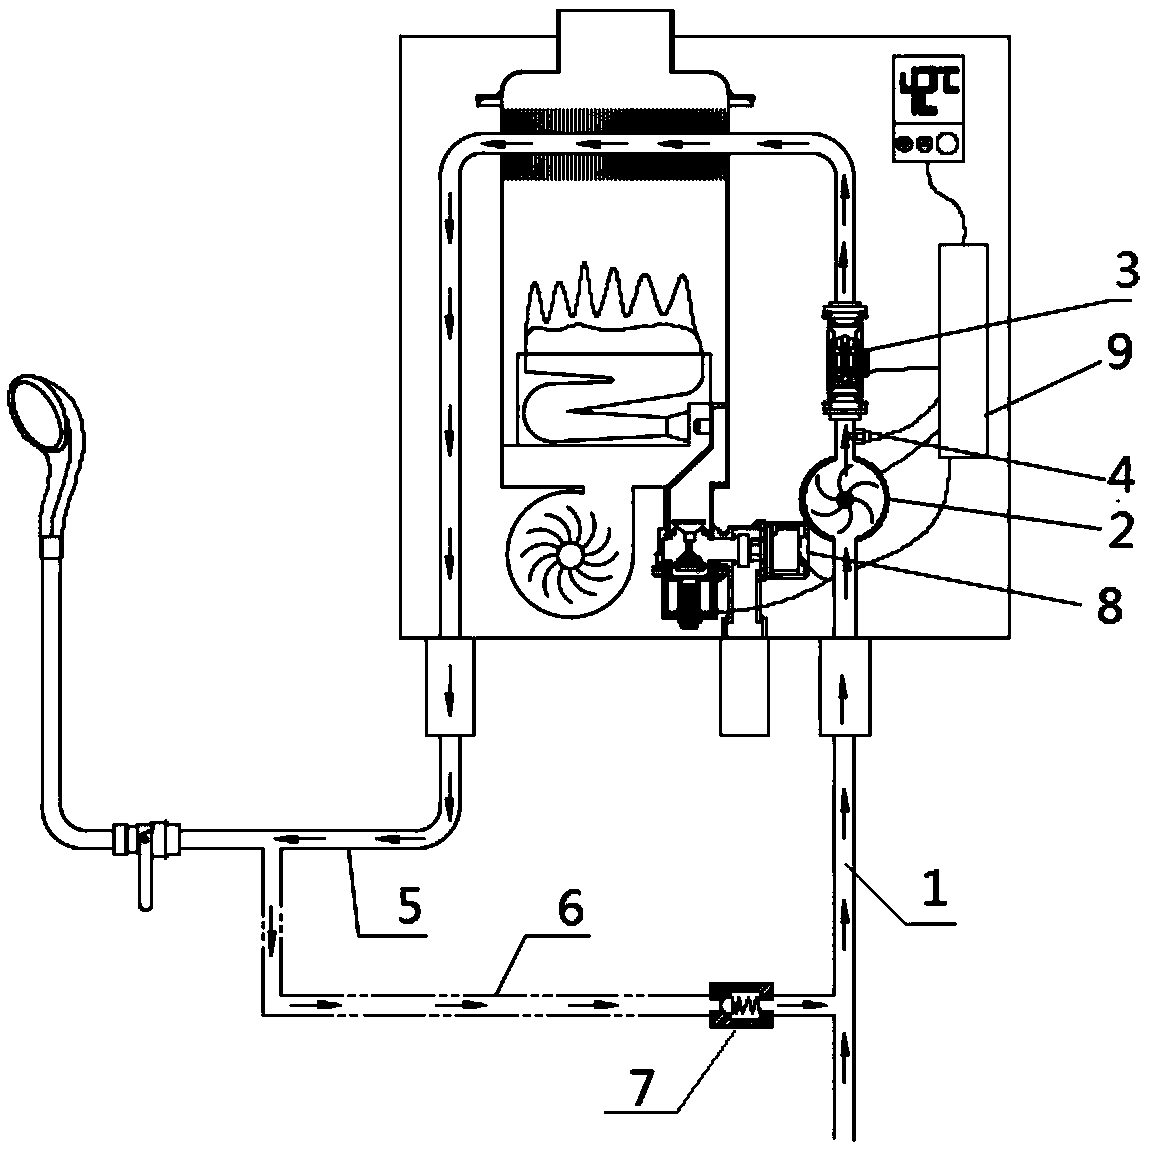 Control method of supercharging function of gas water heater